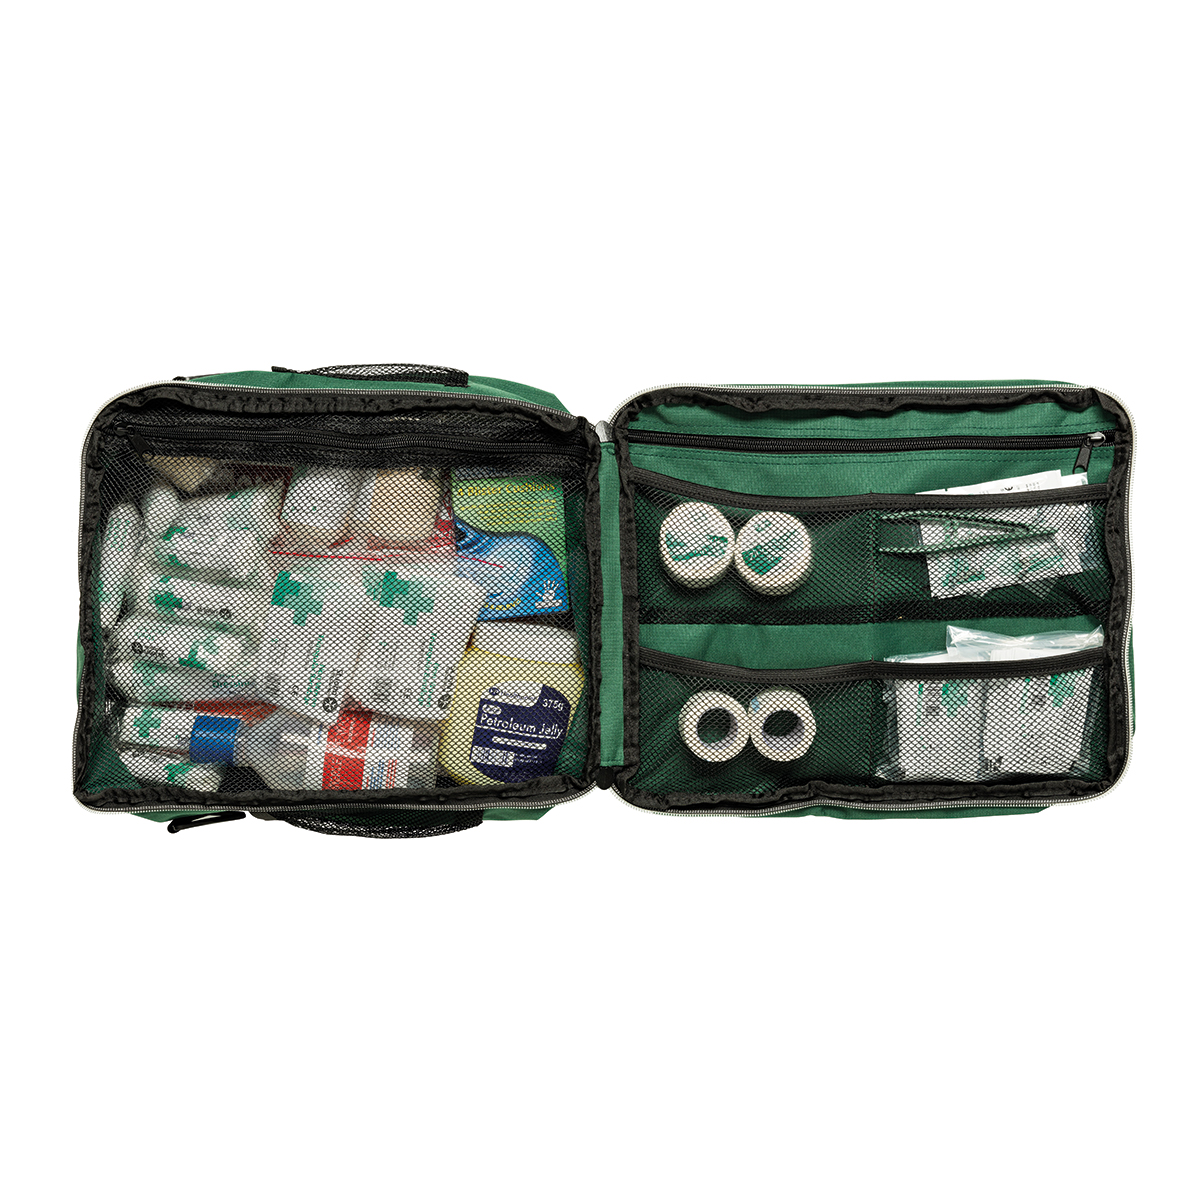 Deluxe Sports First Aid Kit